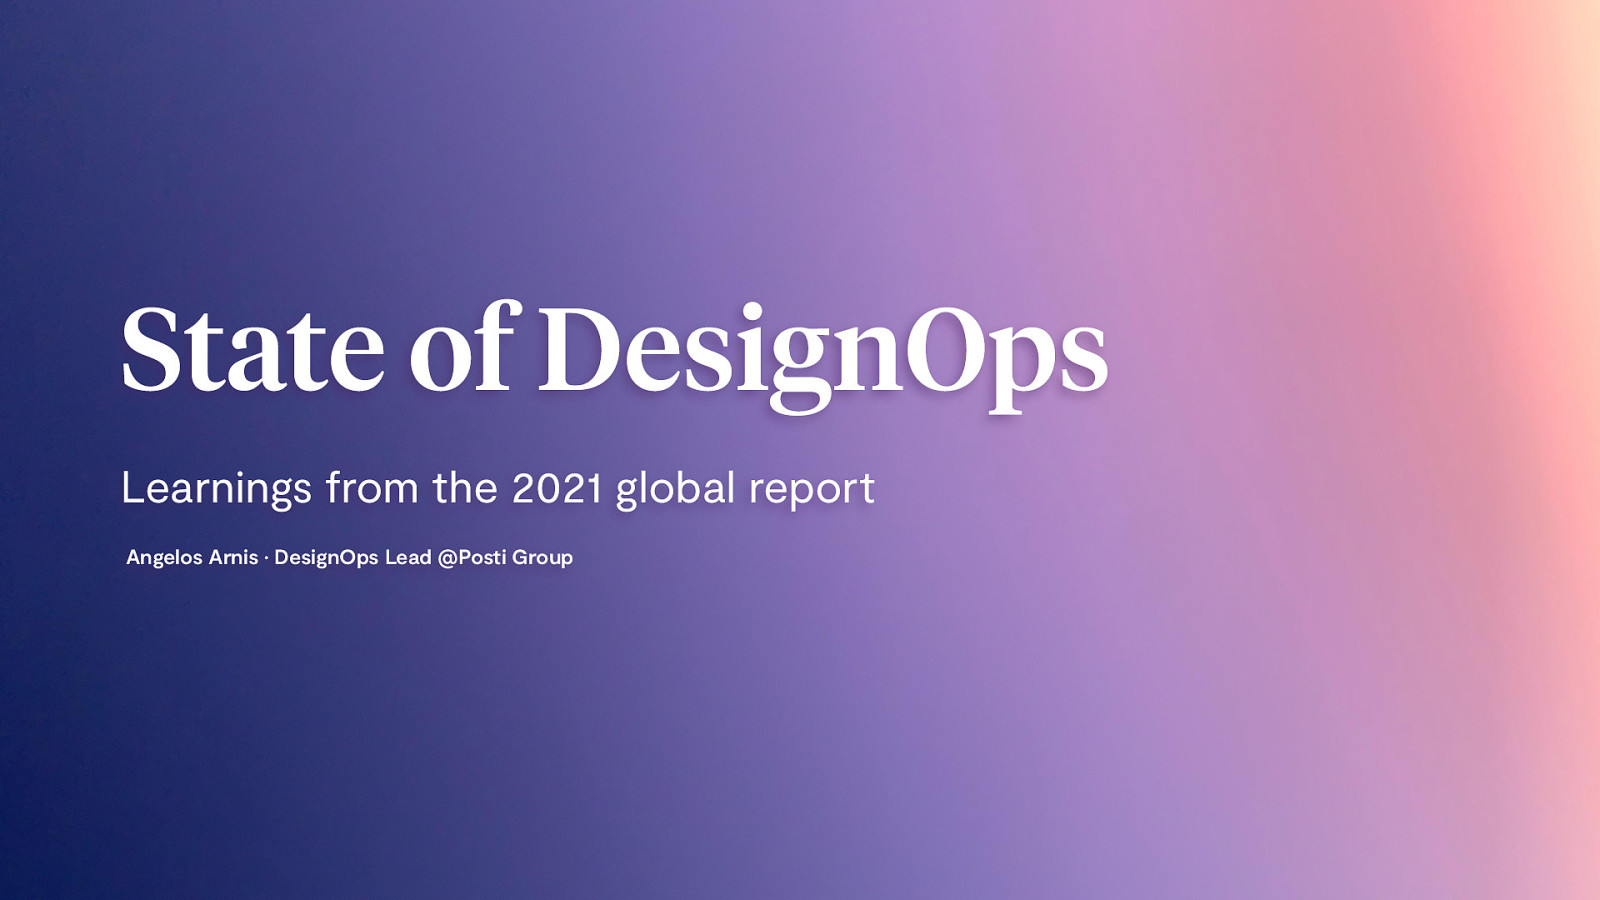 State of DesignOps: Learnings from the 2021 Global Report